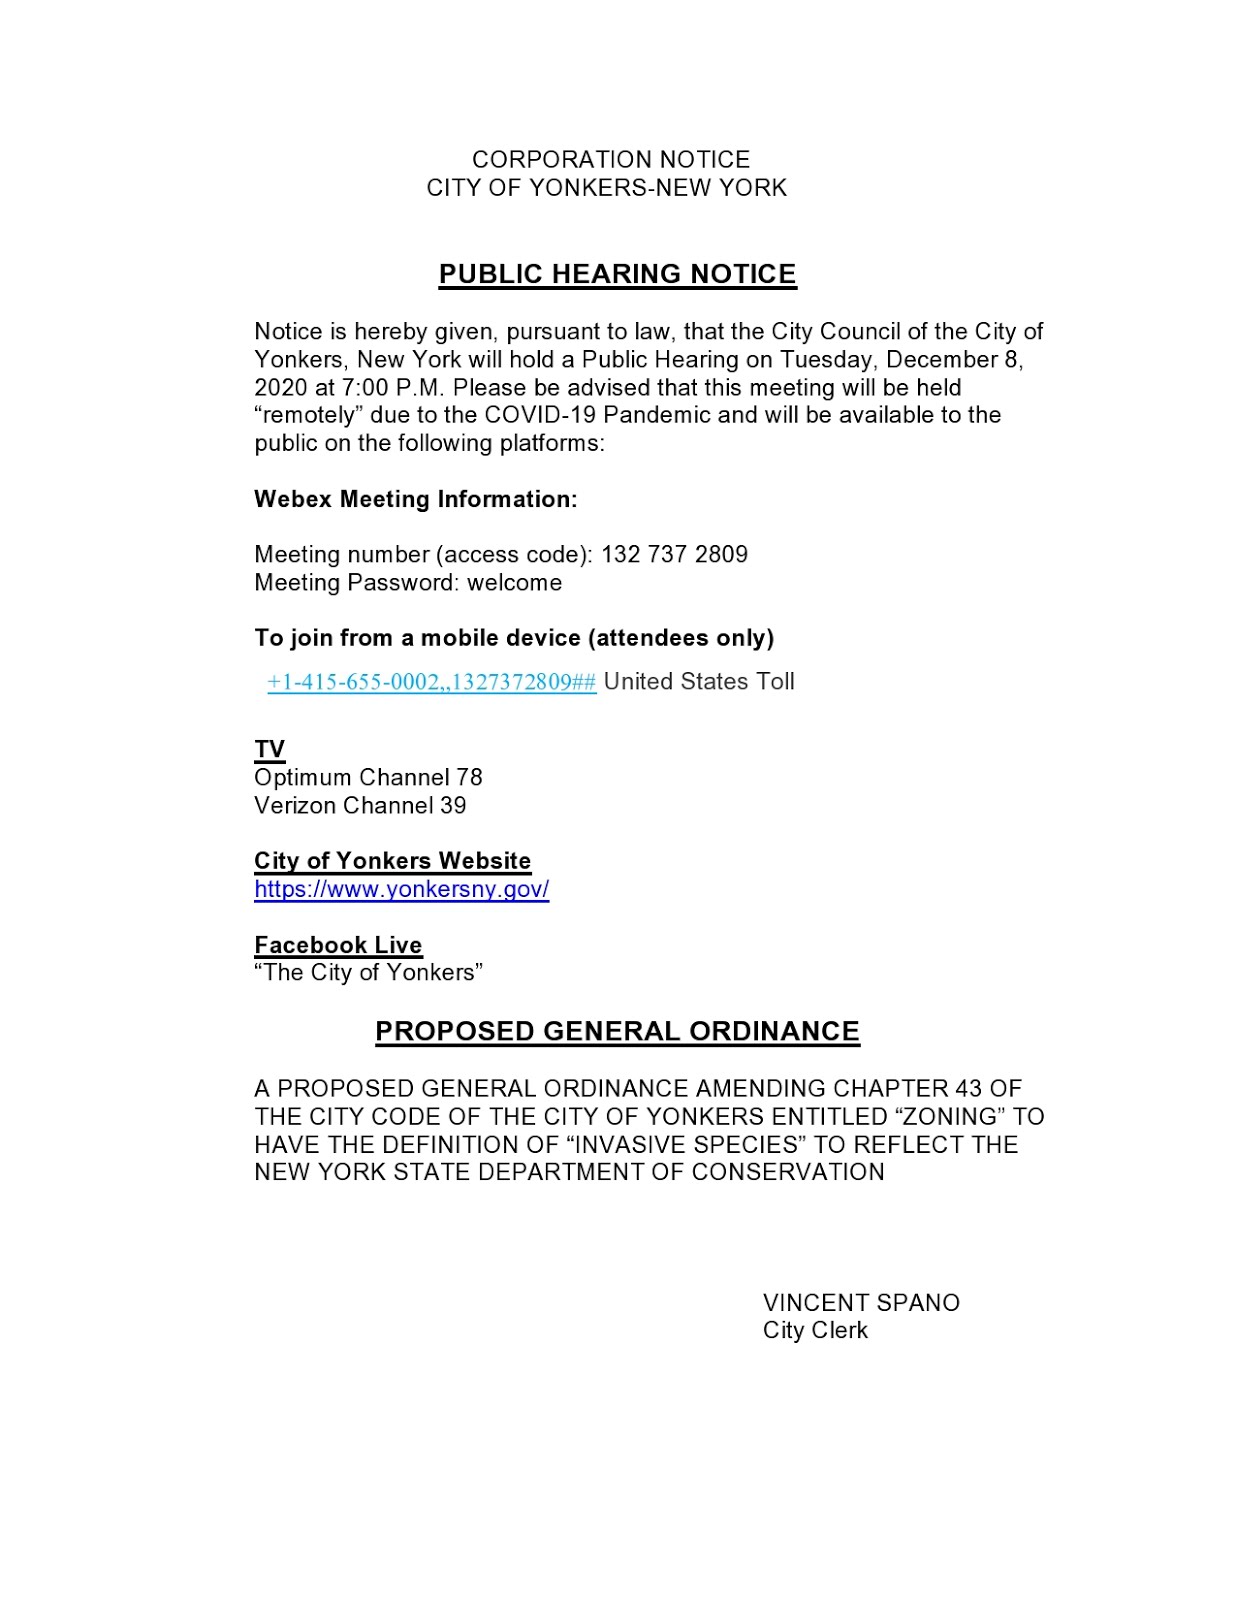 City of Yonkers: Legal Notice.